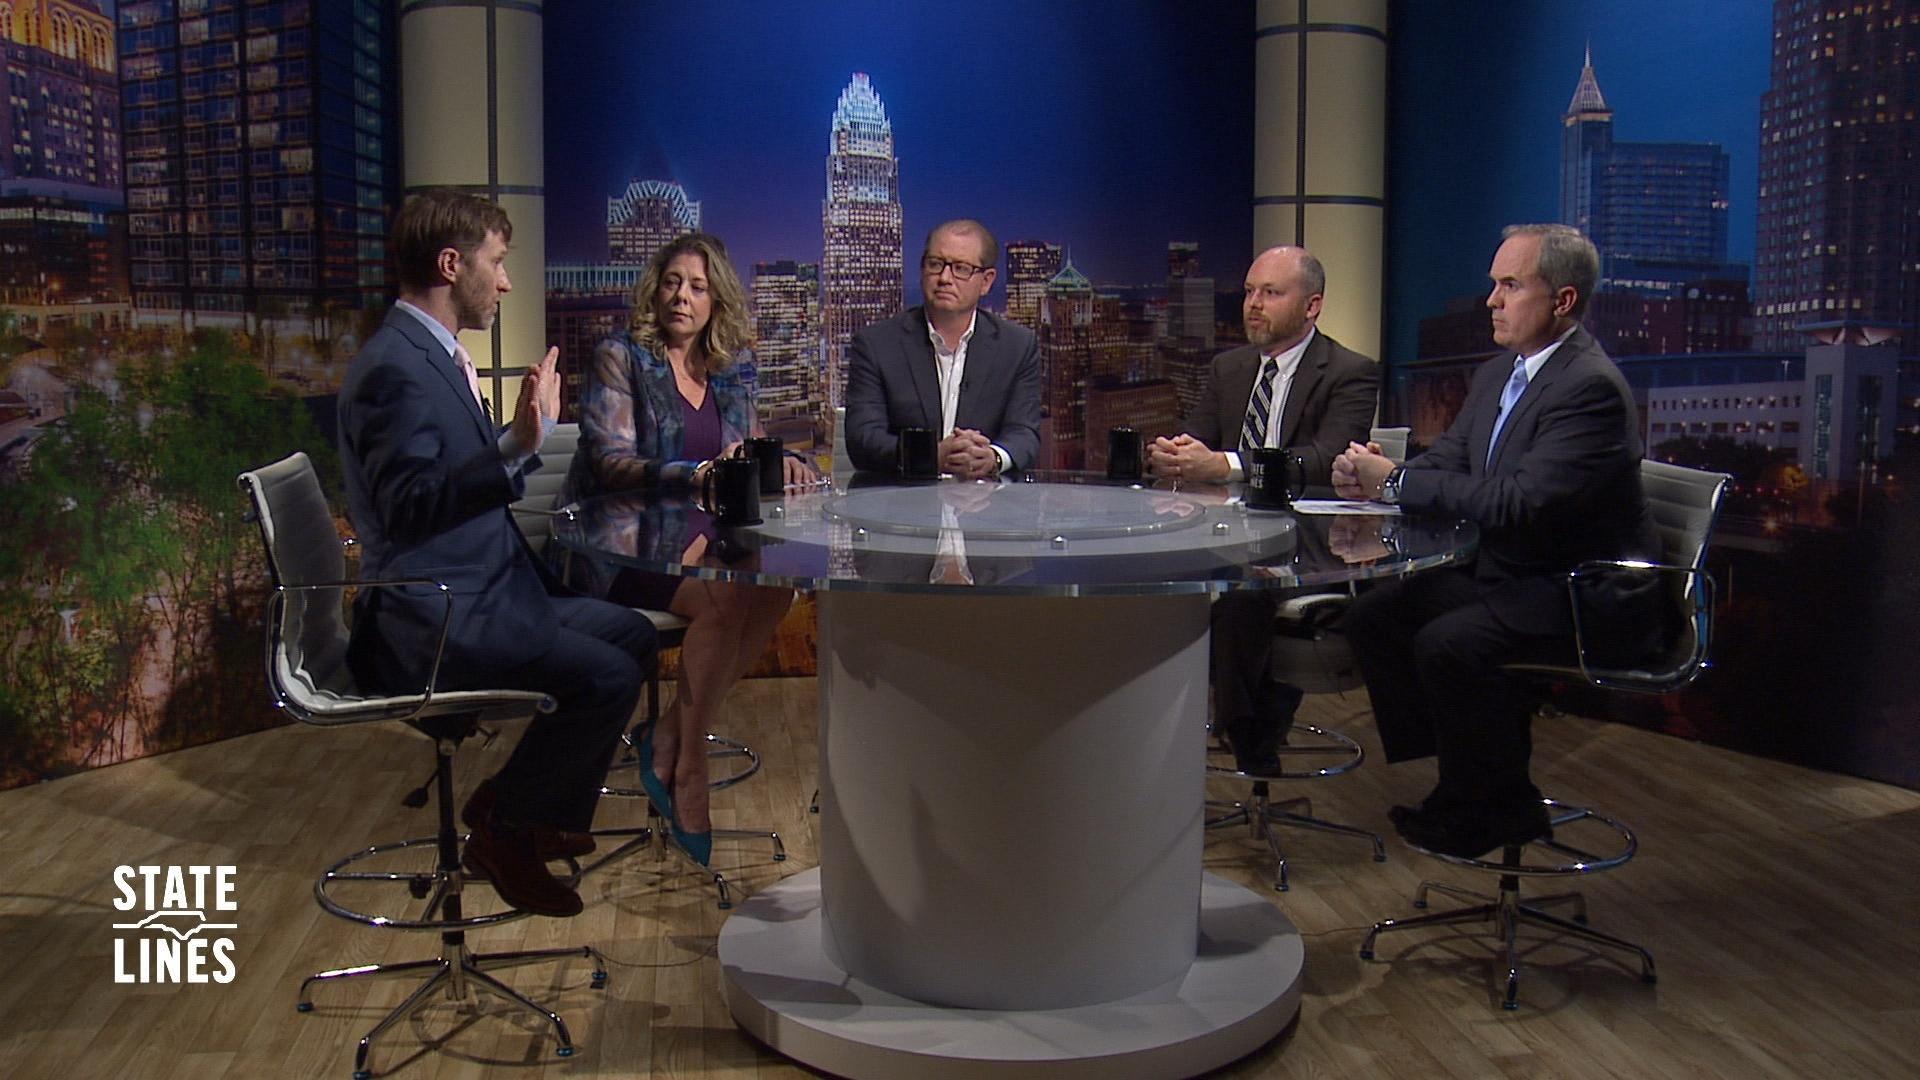 Sitting around the State Lines round table are political strategist Morgan Jackson, Colin Campbell (WUNC Radio), Donna King (Carolina Journal) and Michael McElroy (Cardinal & Pine) and State Lines host, Kelly McCullen.